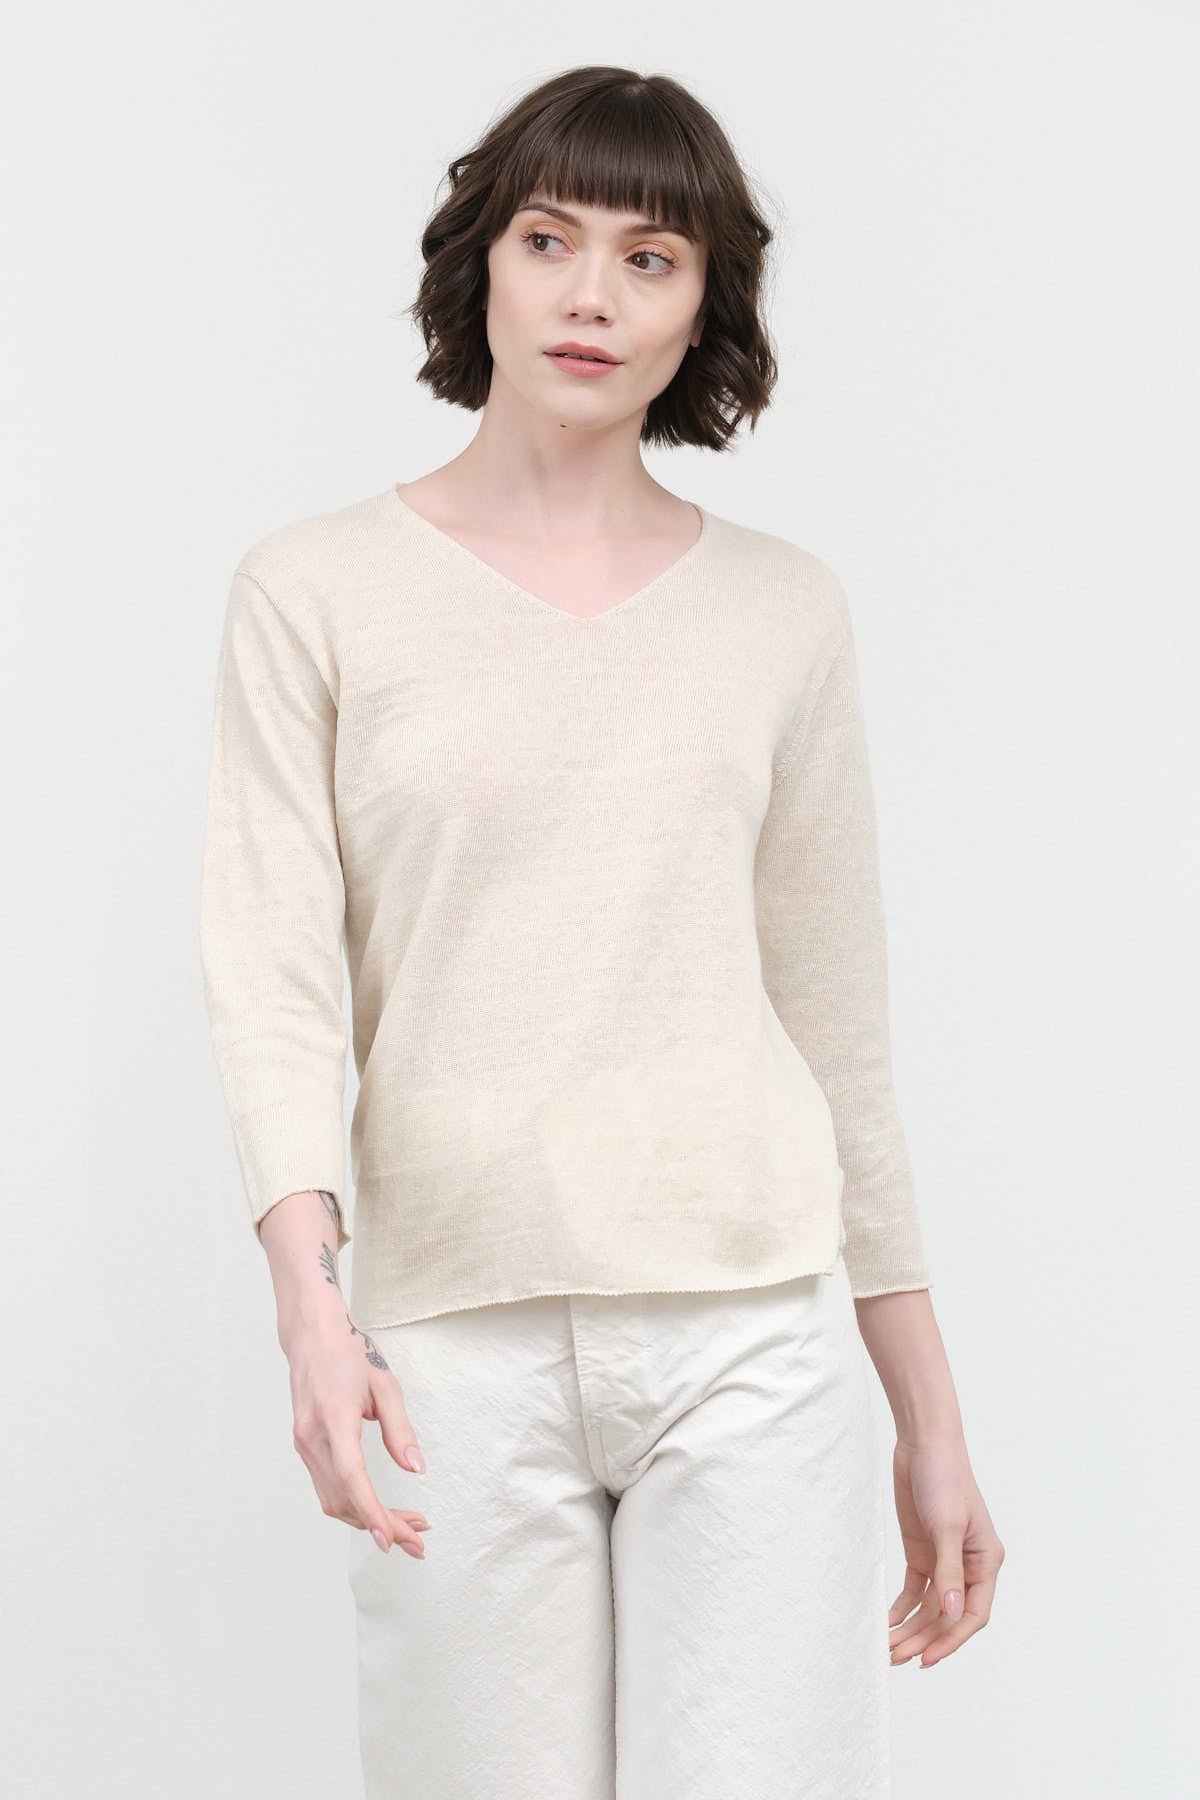 Styled Washable Linen V Neck Pullover in Ivory